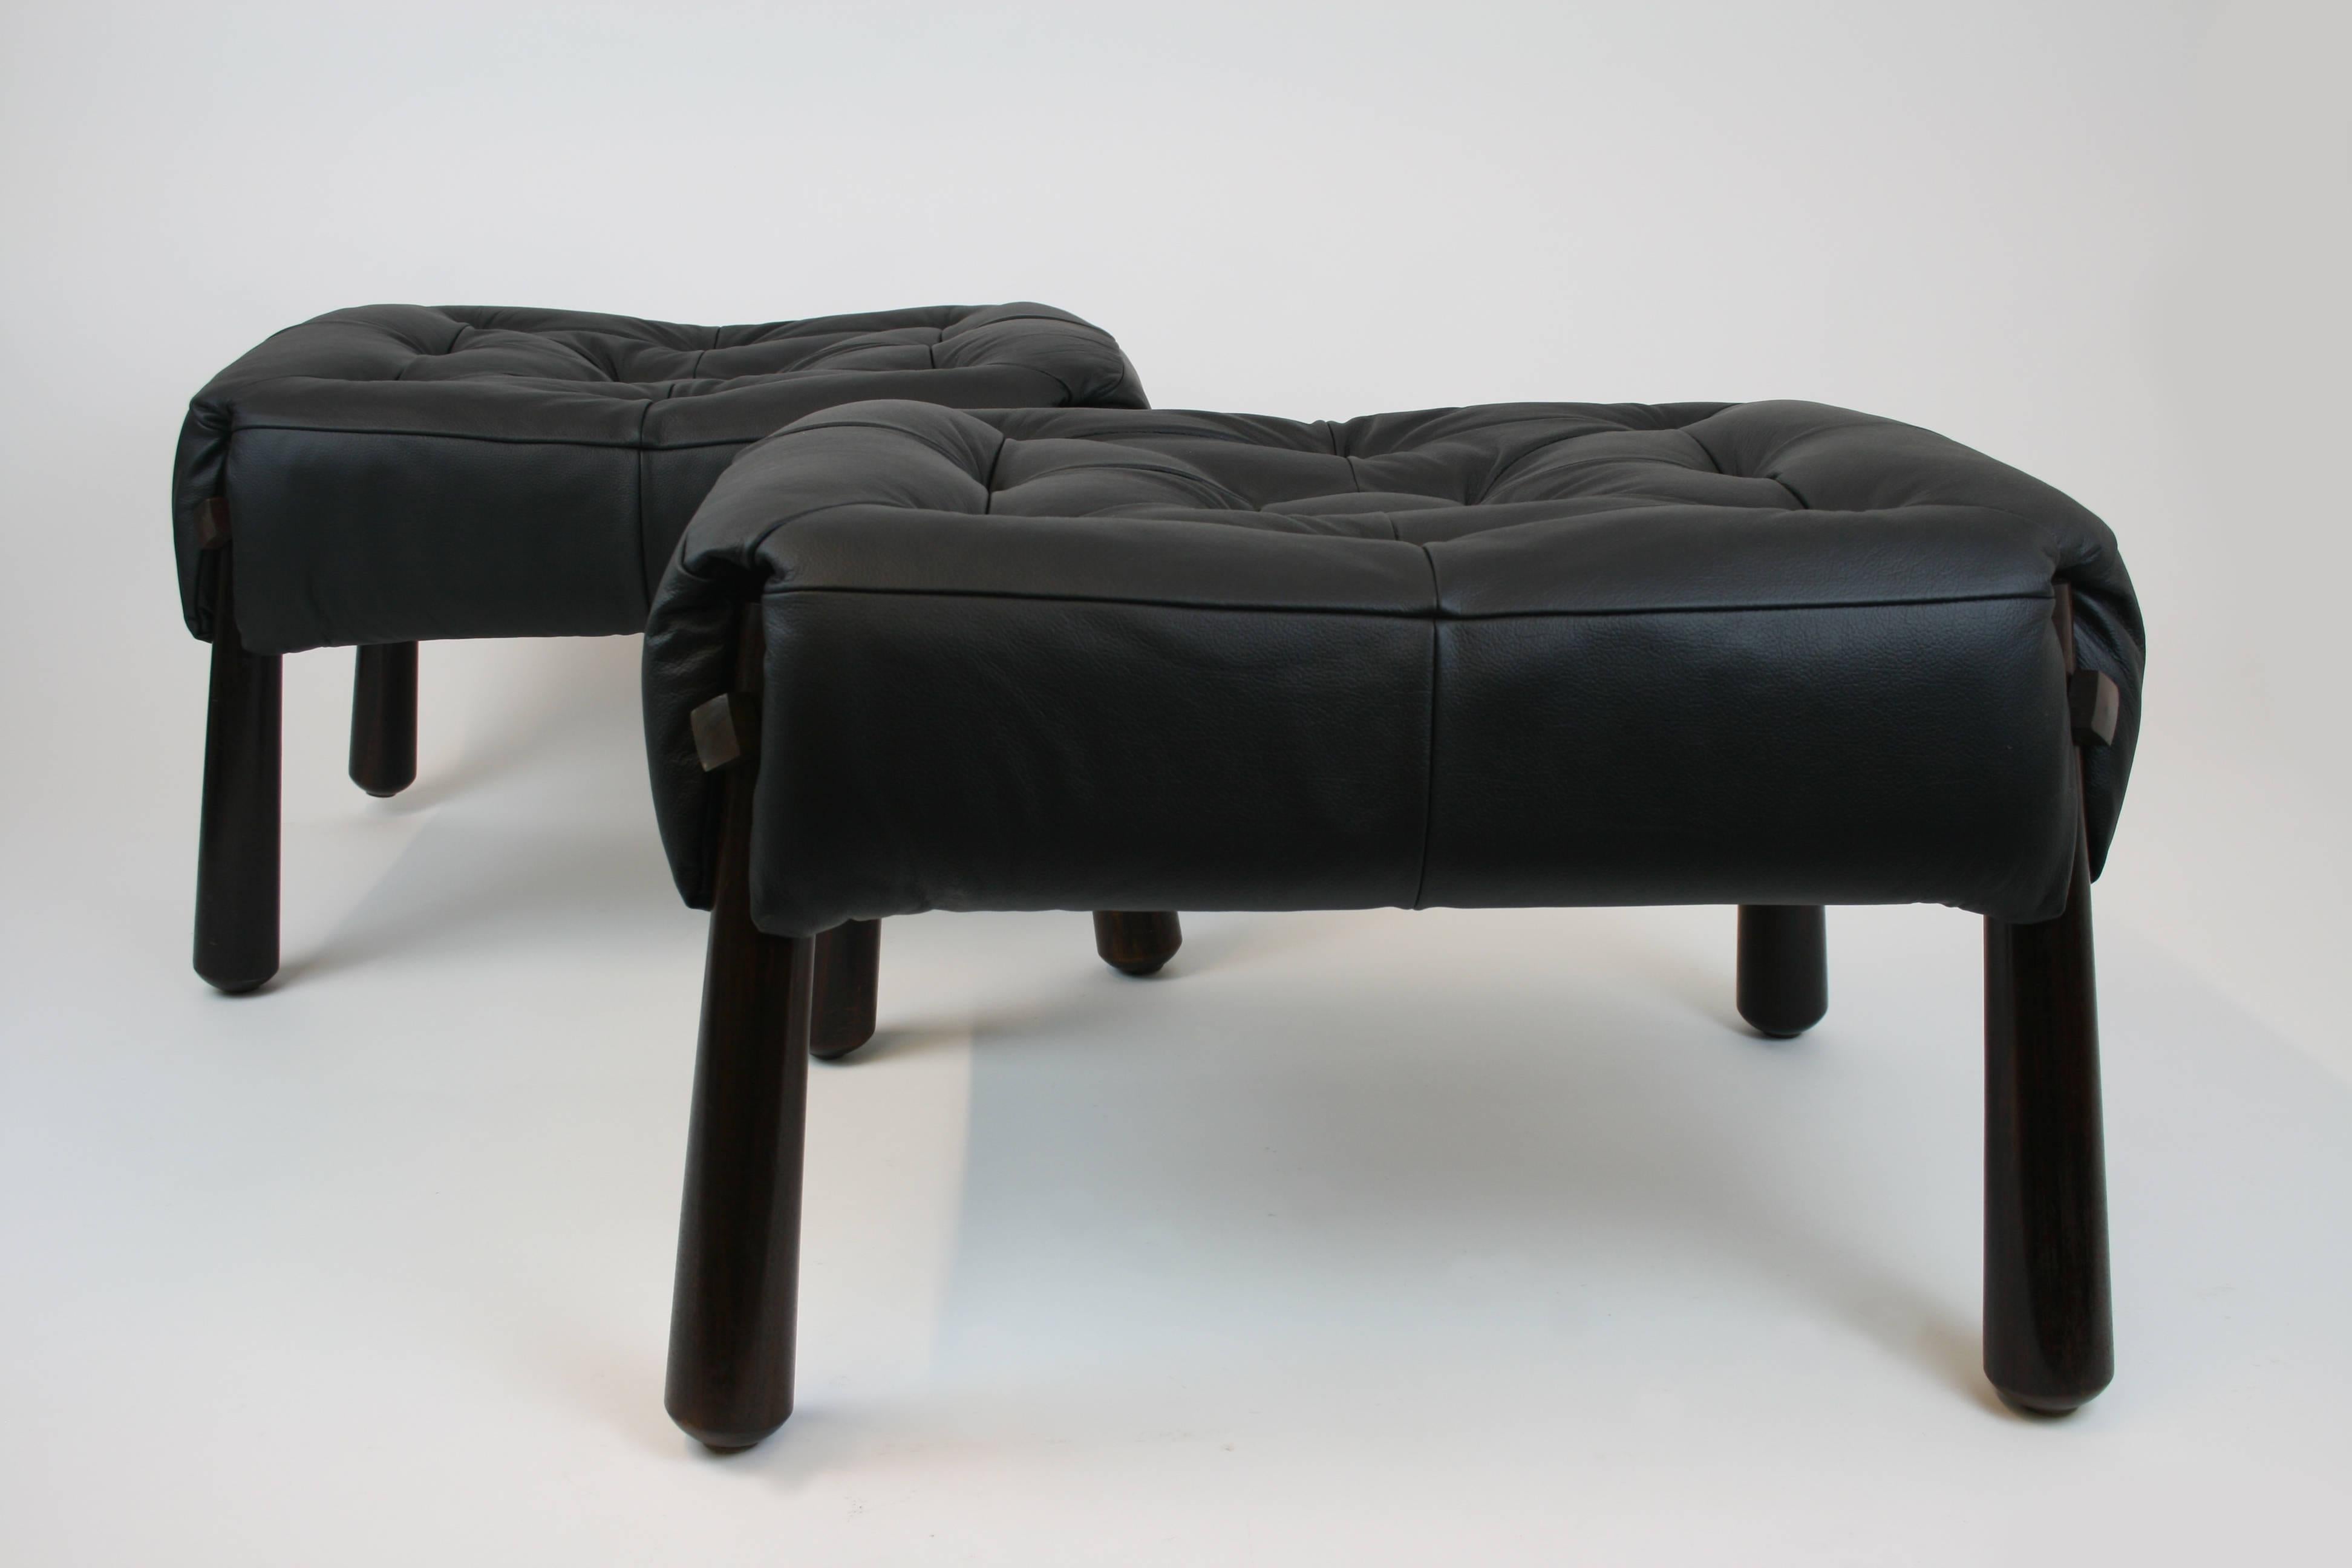 Brazilian Pair of Stools by Percival Lafer